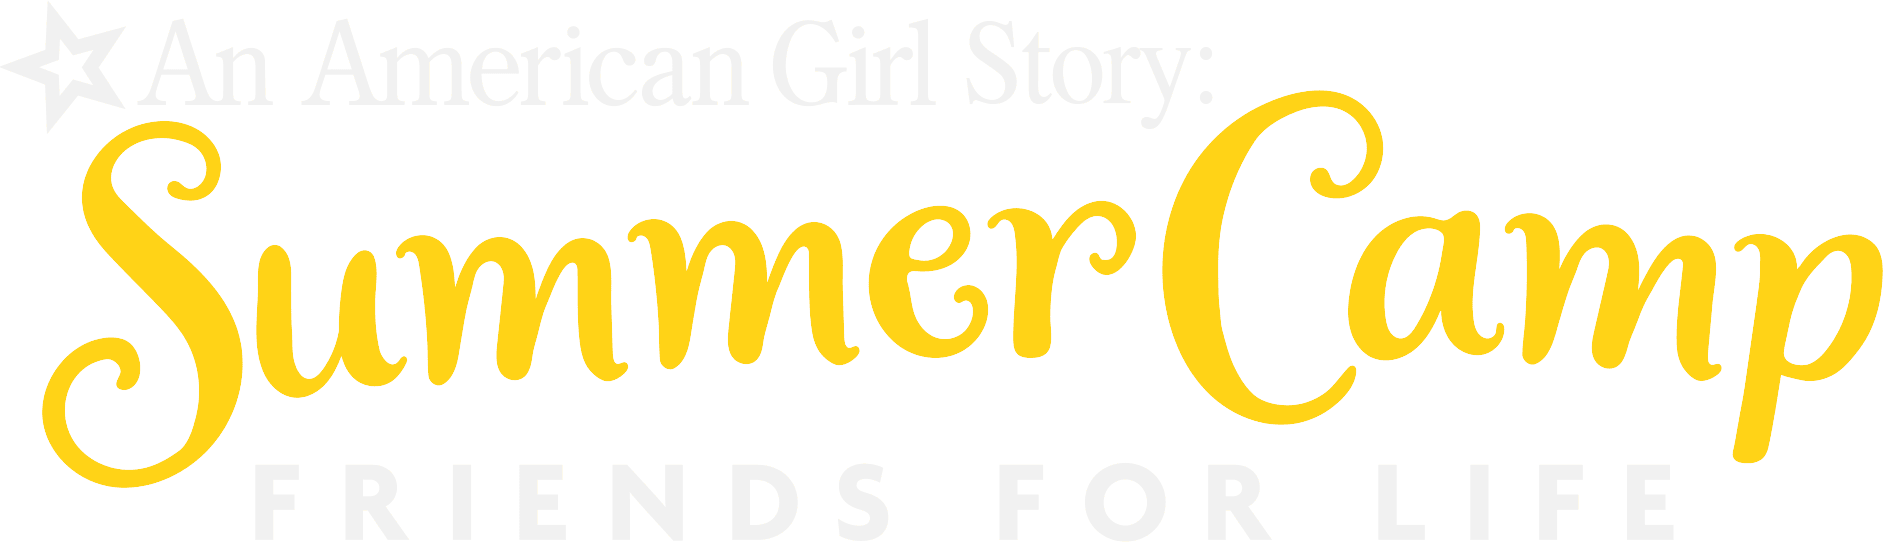 An American Girl Story: Summer Camp, Friends For Life logo